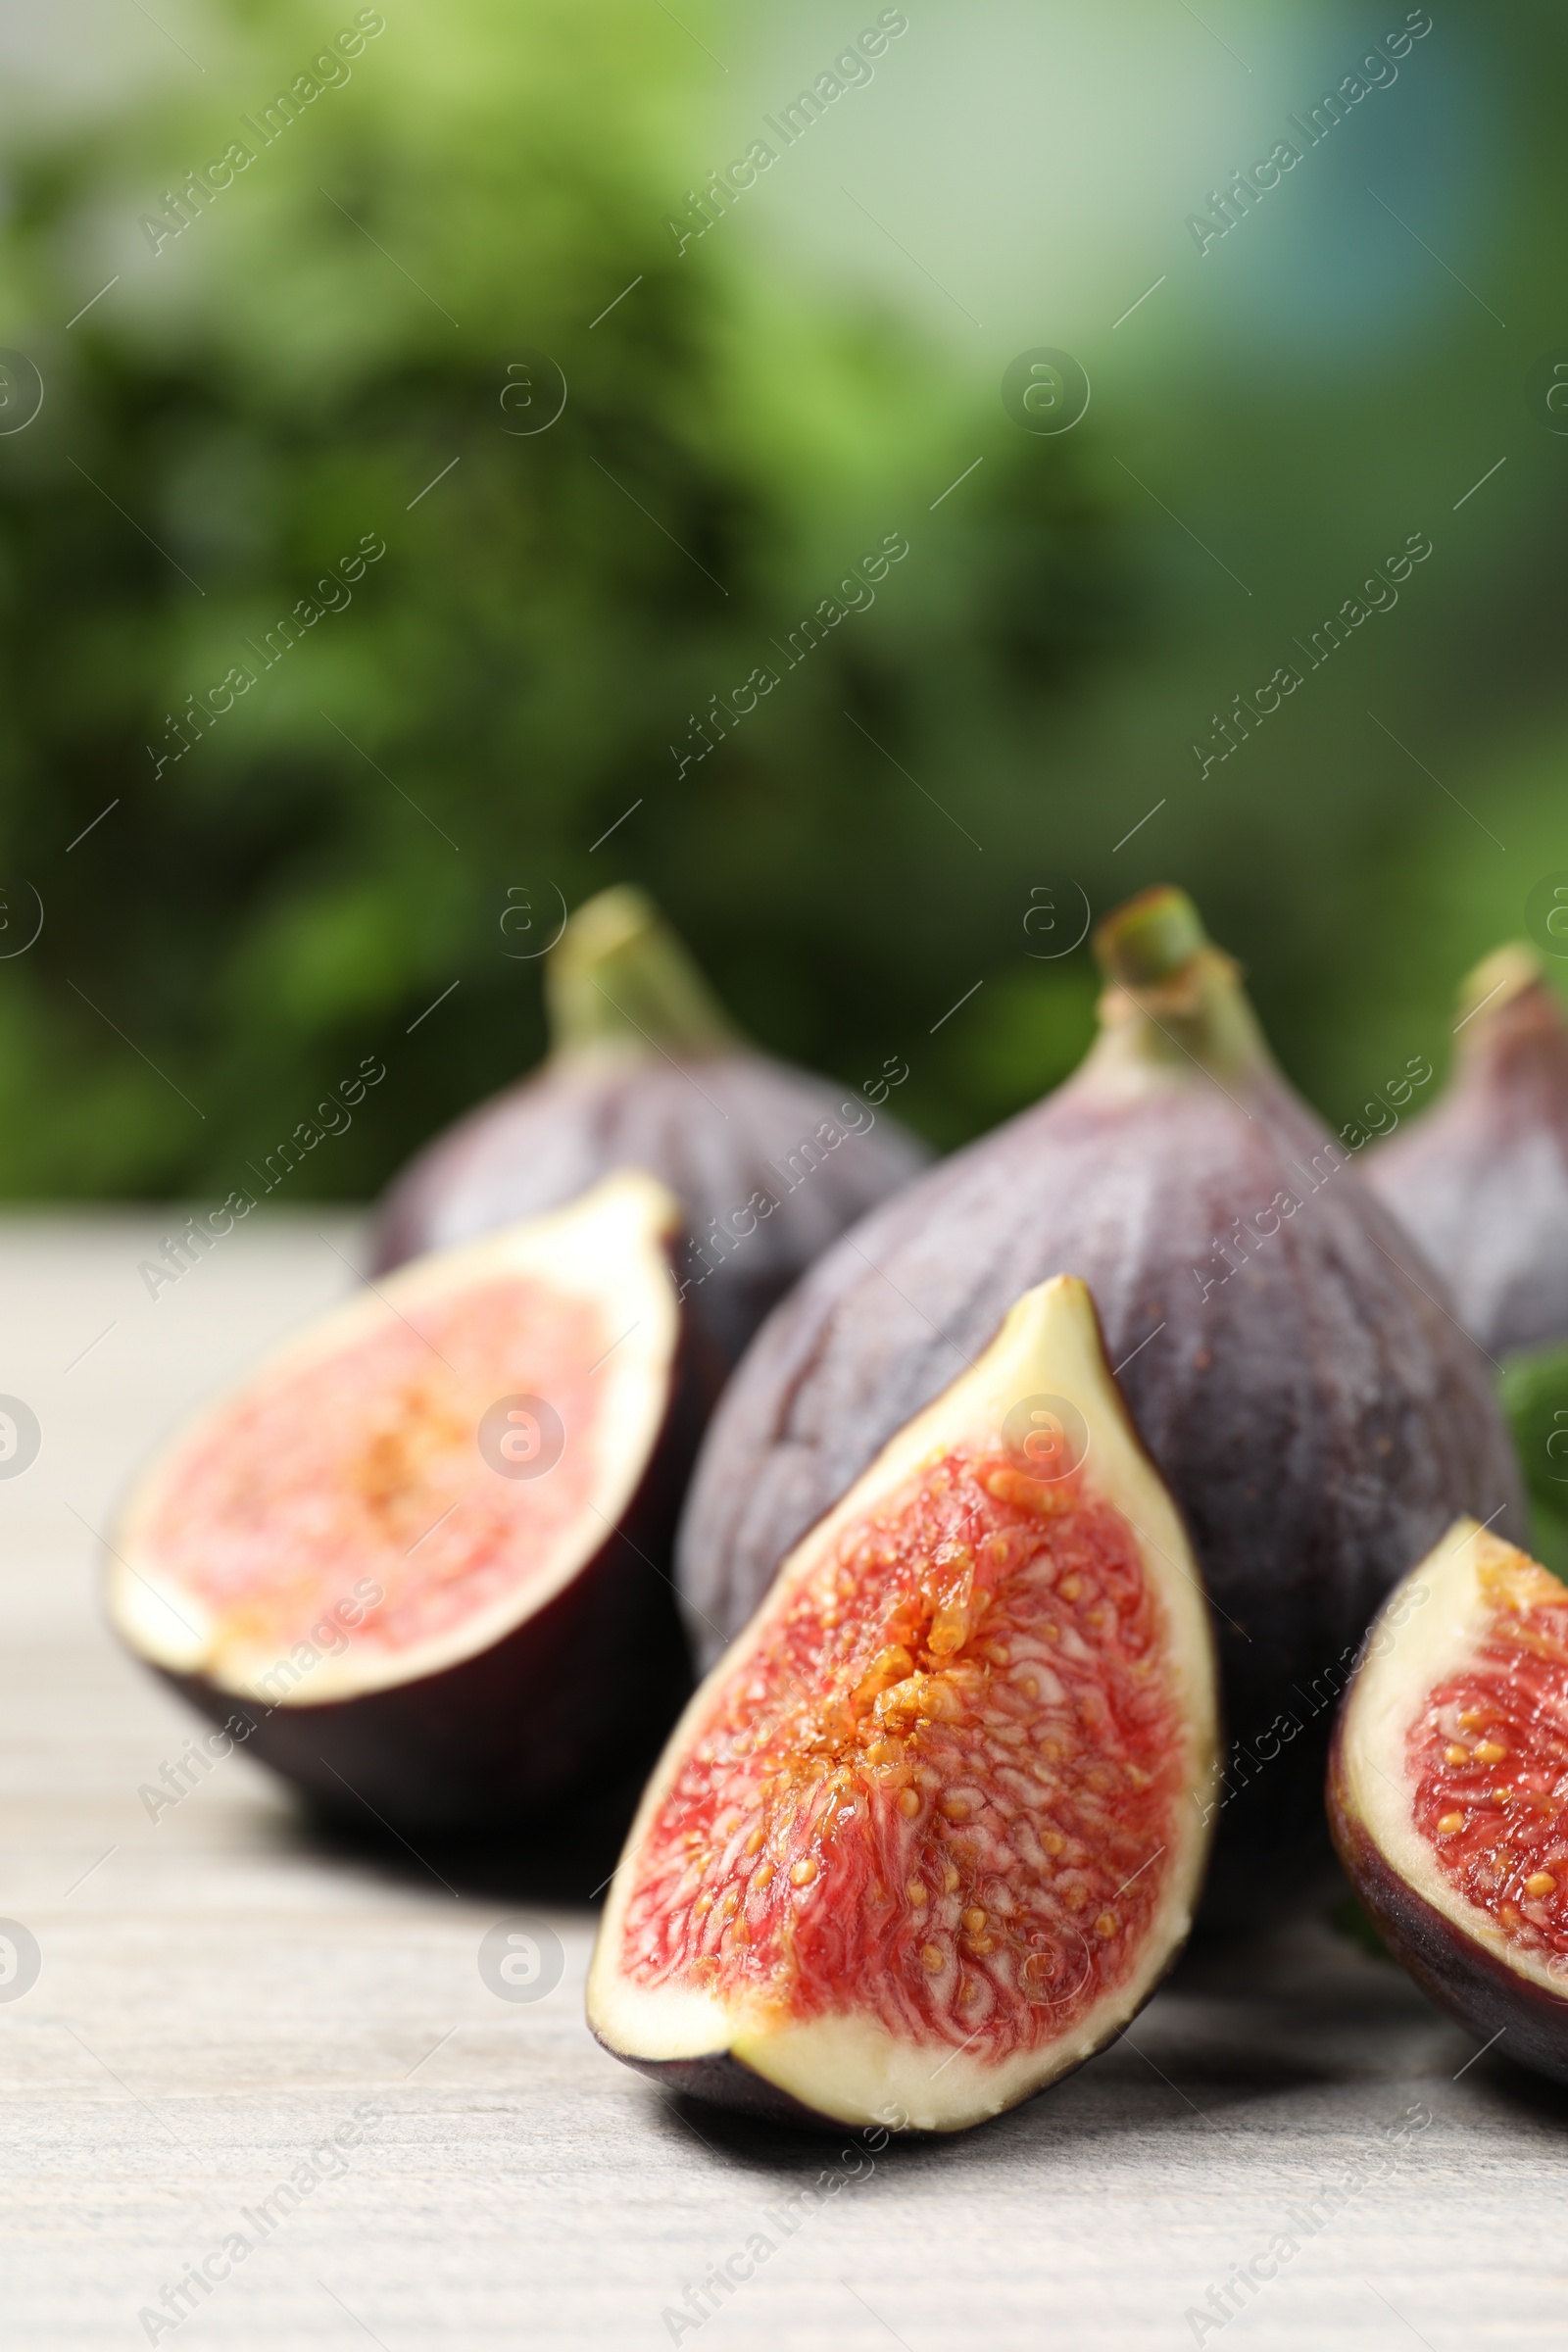 Photo of Whole and cut ripe figs on light wooden table against blurred green background, closeup